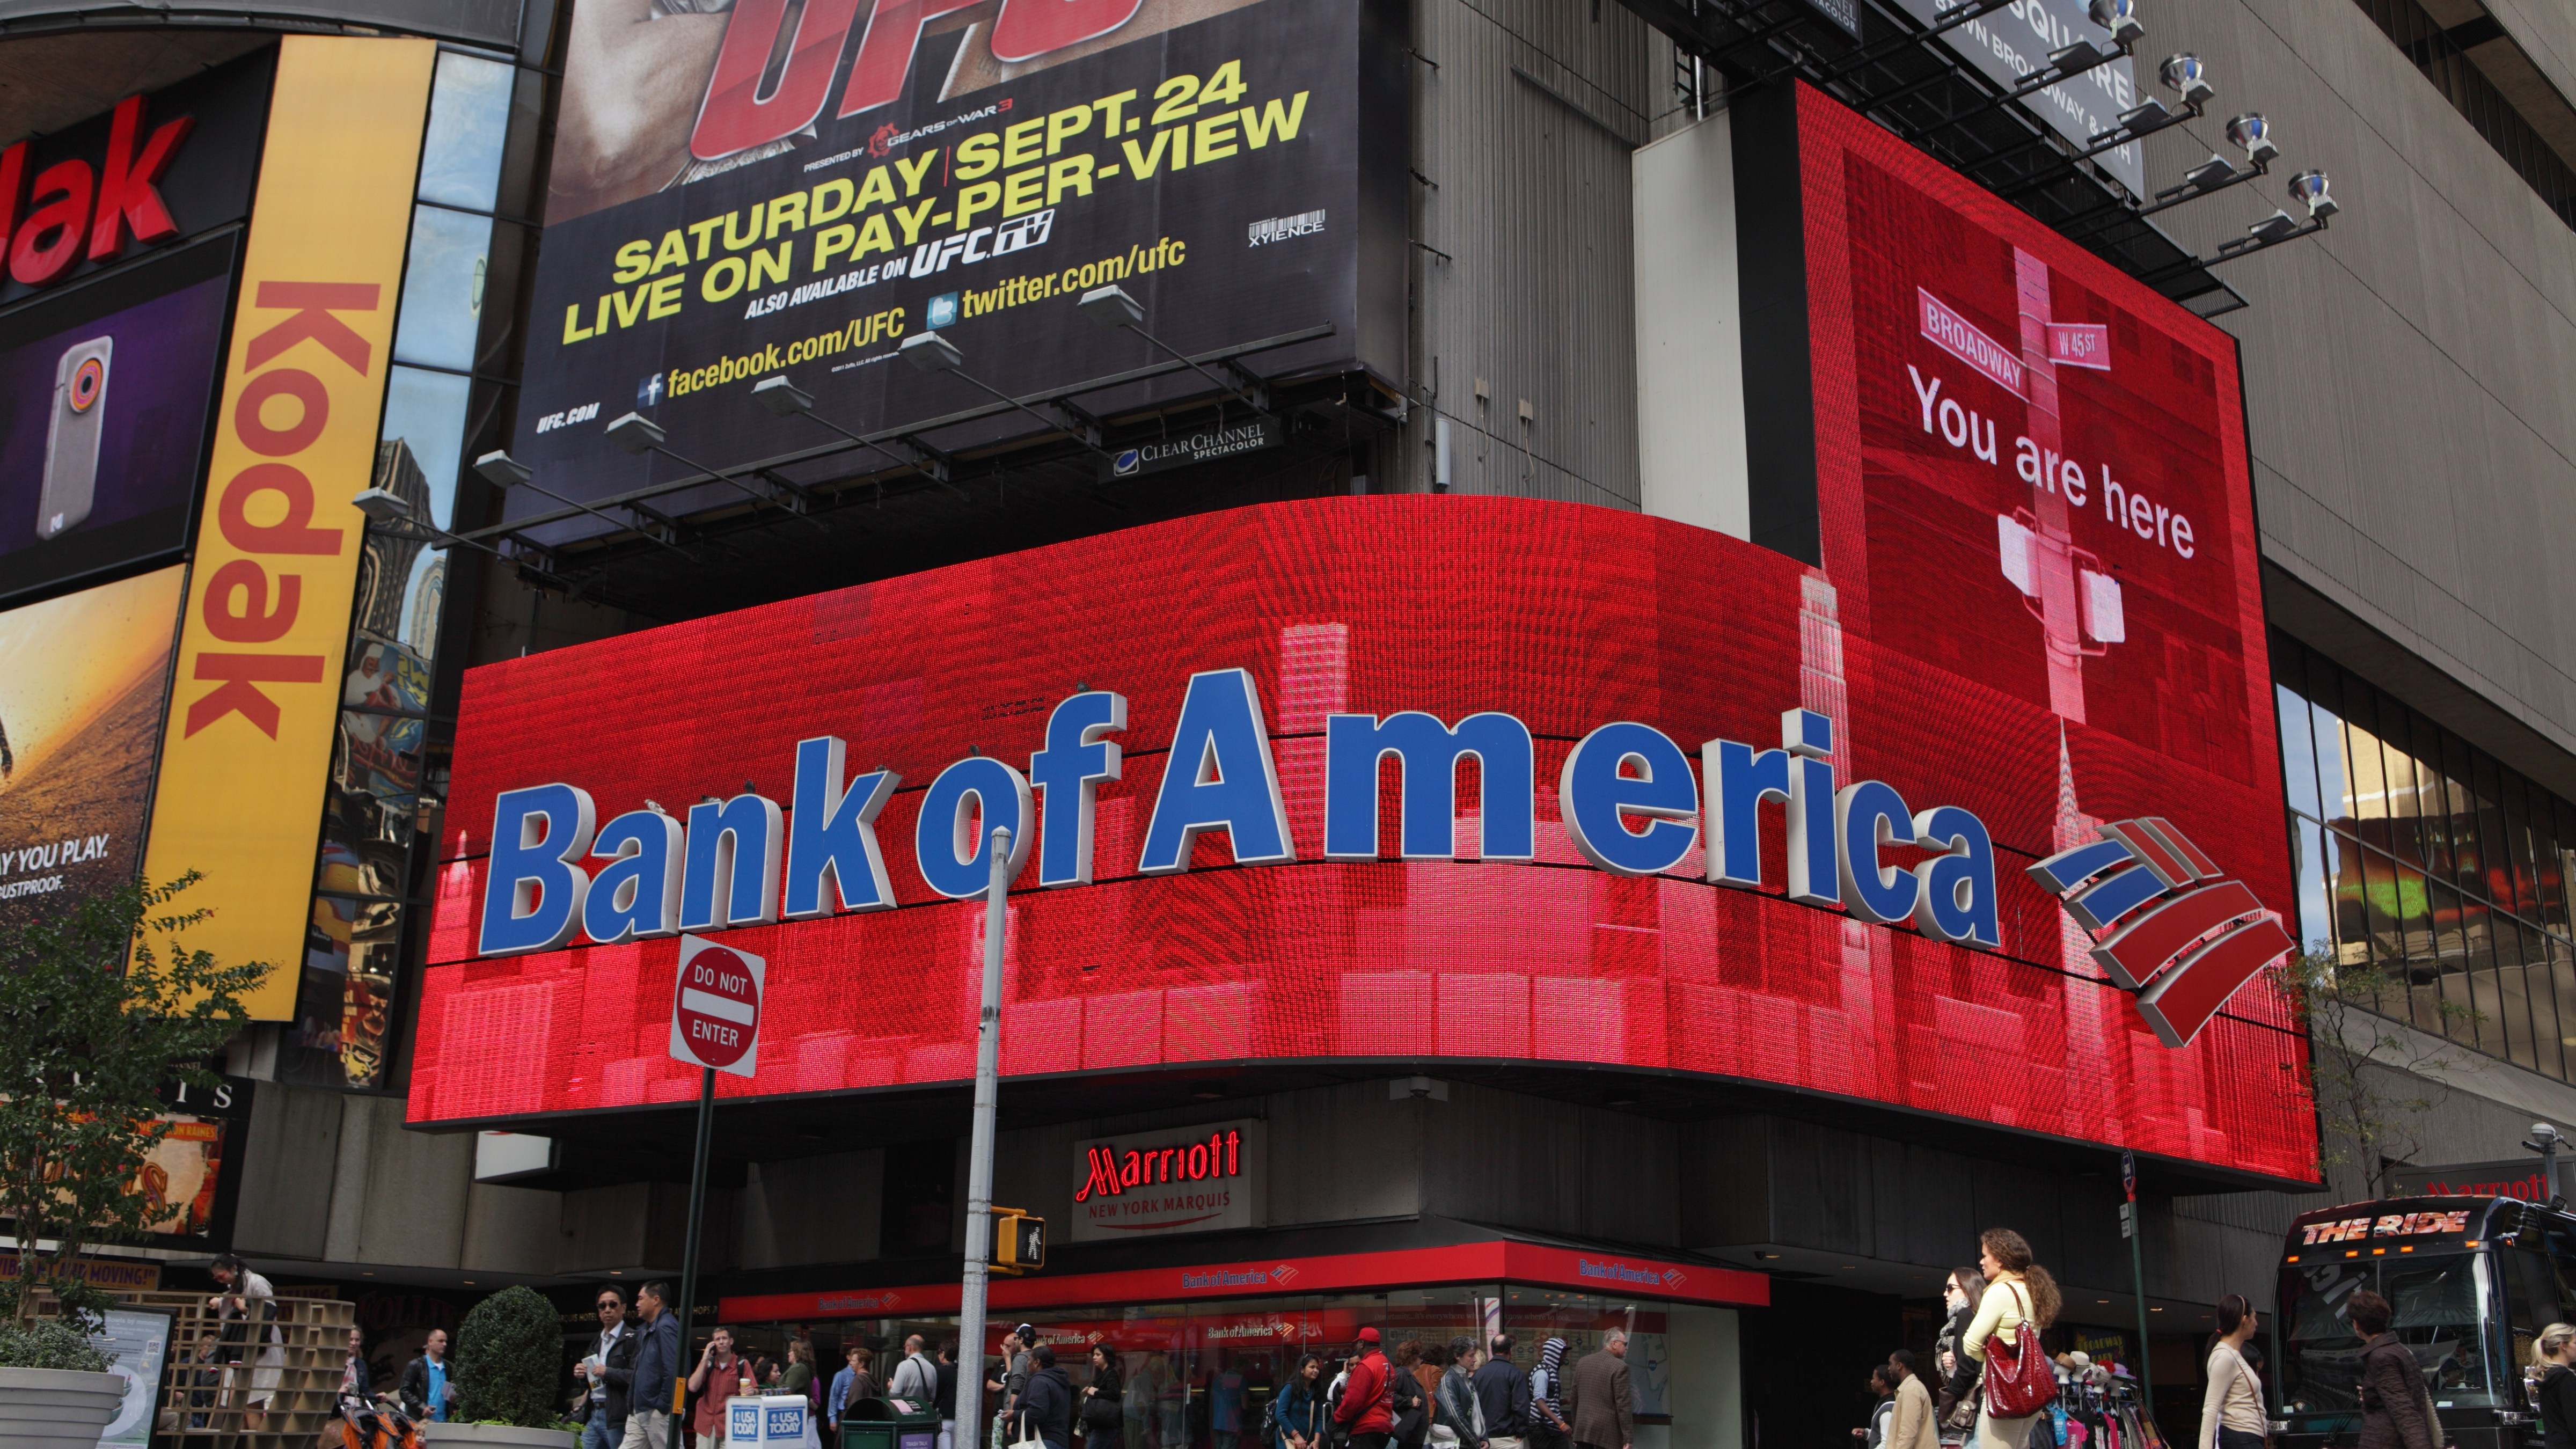 Bank of America  is one of the four largest banks in the United States and as such has a high profile with investors